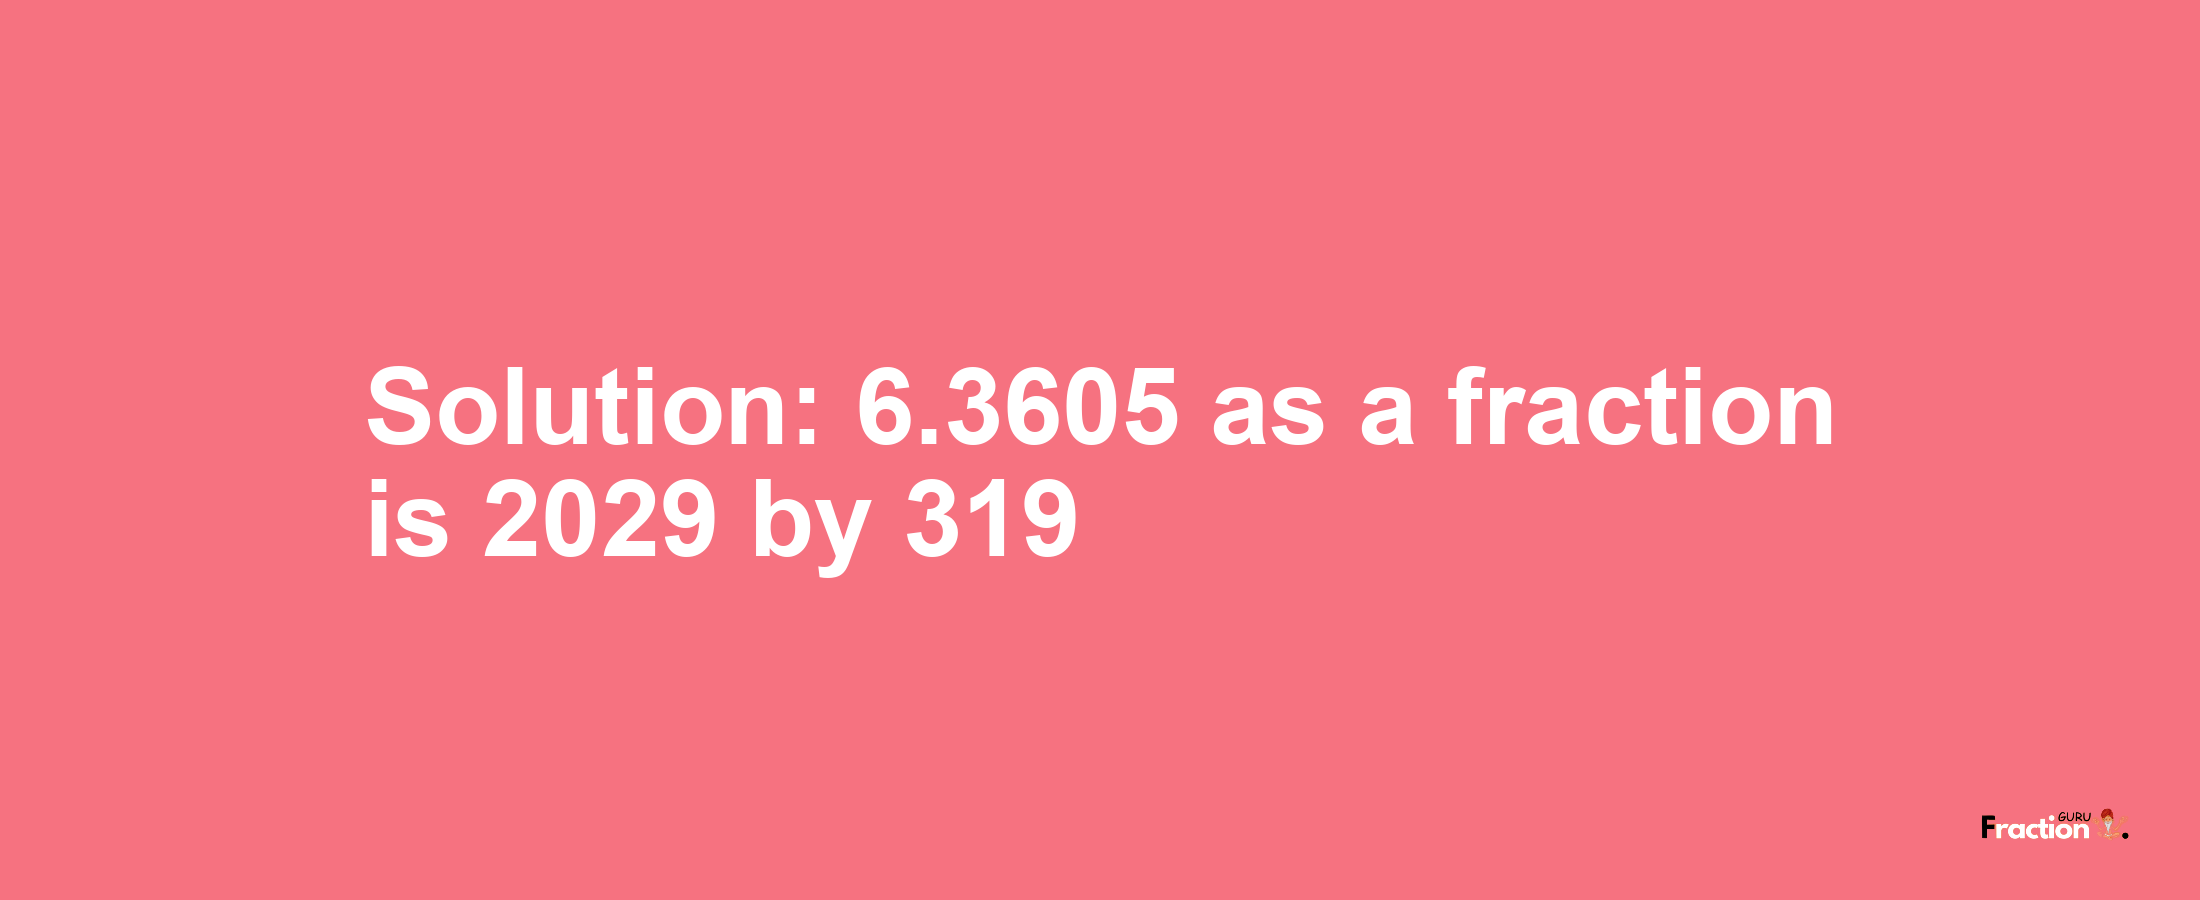 Solution:6.3605 as a fraction is 2029/319